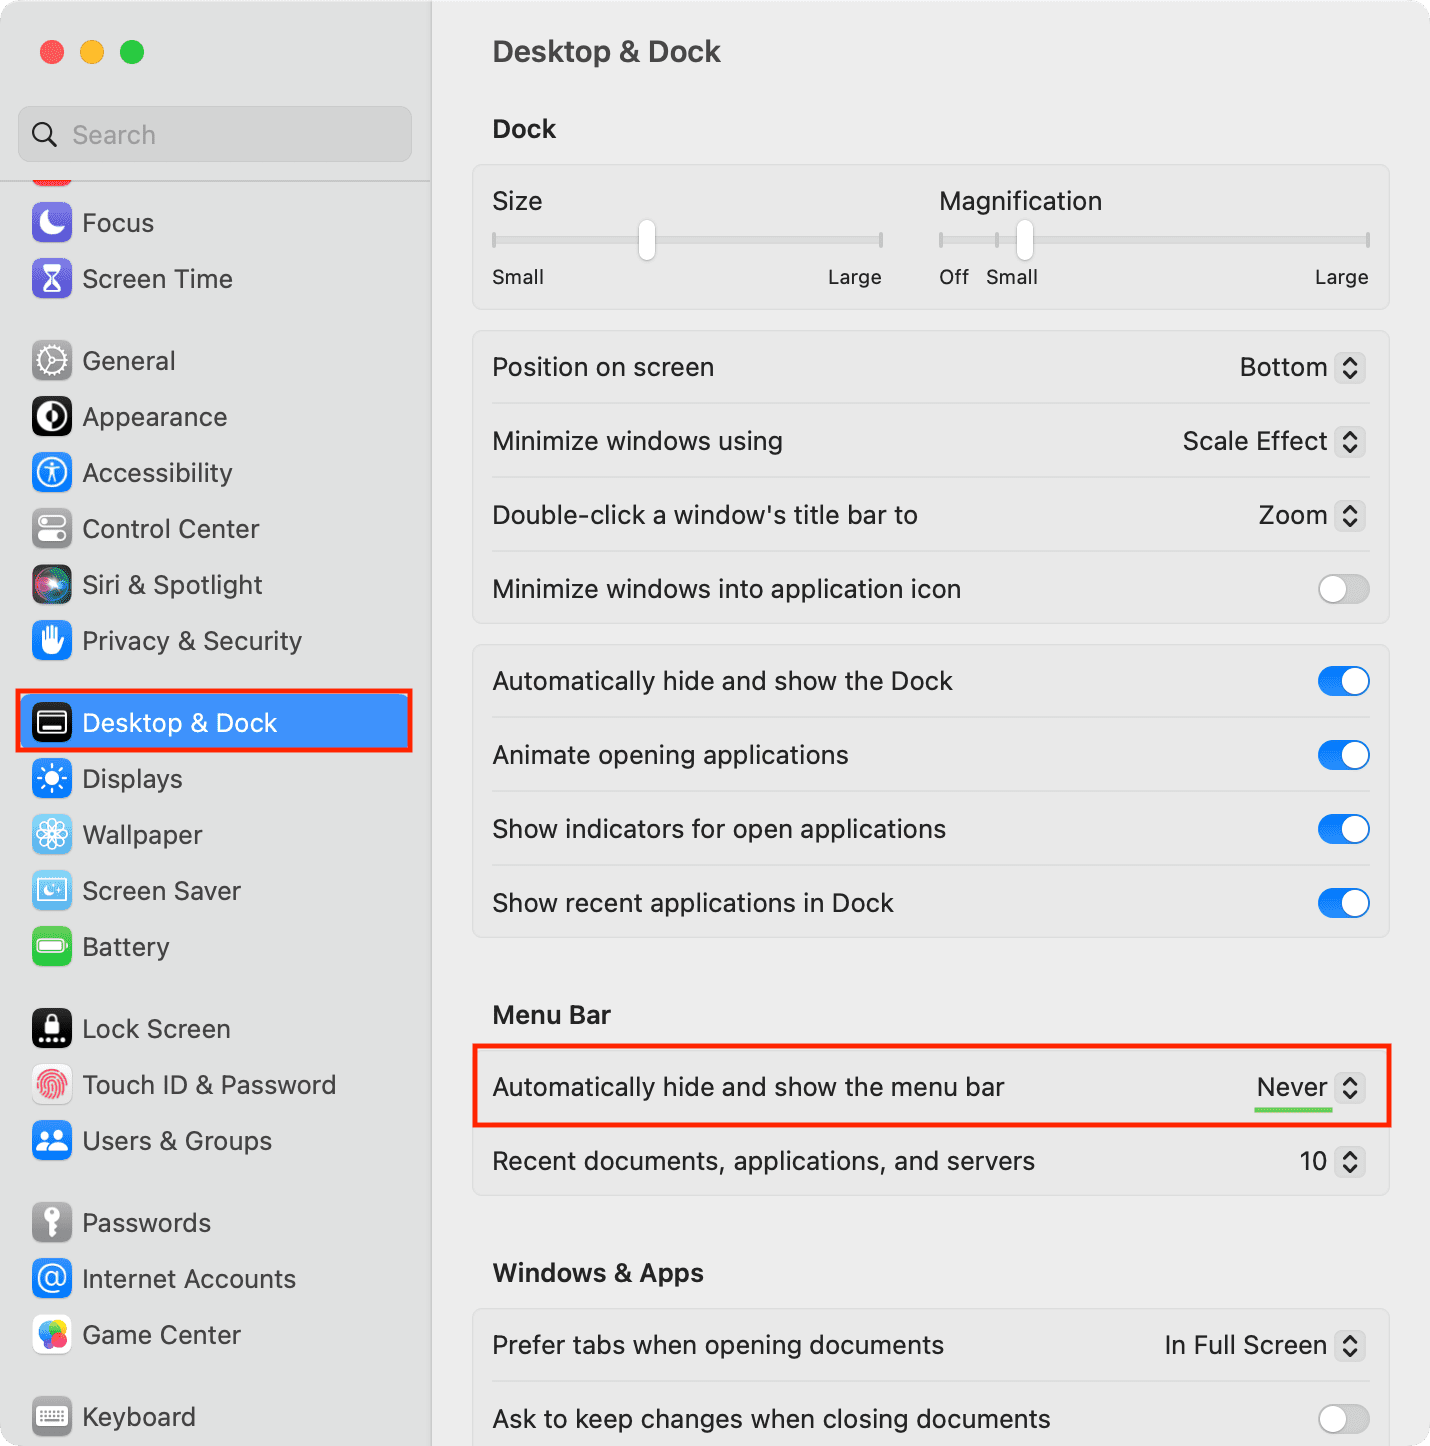 Automatically hide and show the menu bar set to 'Never' on Mac running macOS Ventura and later